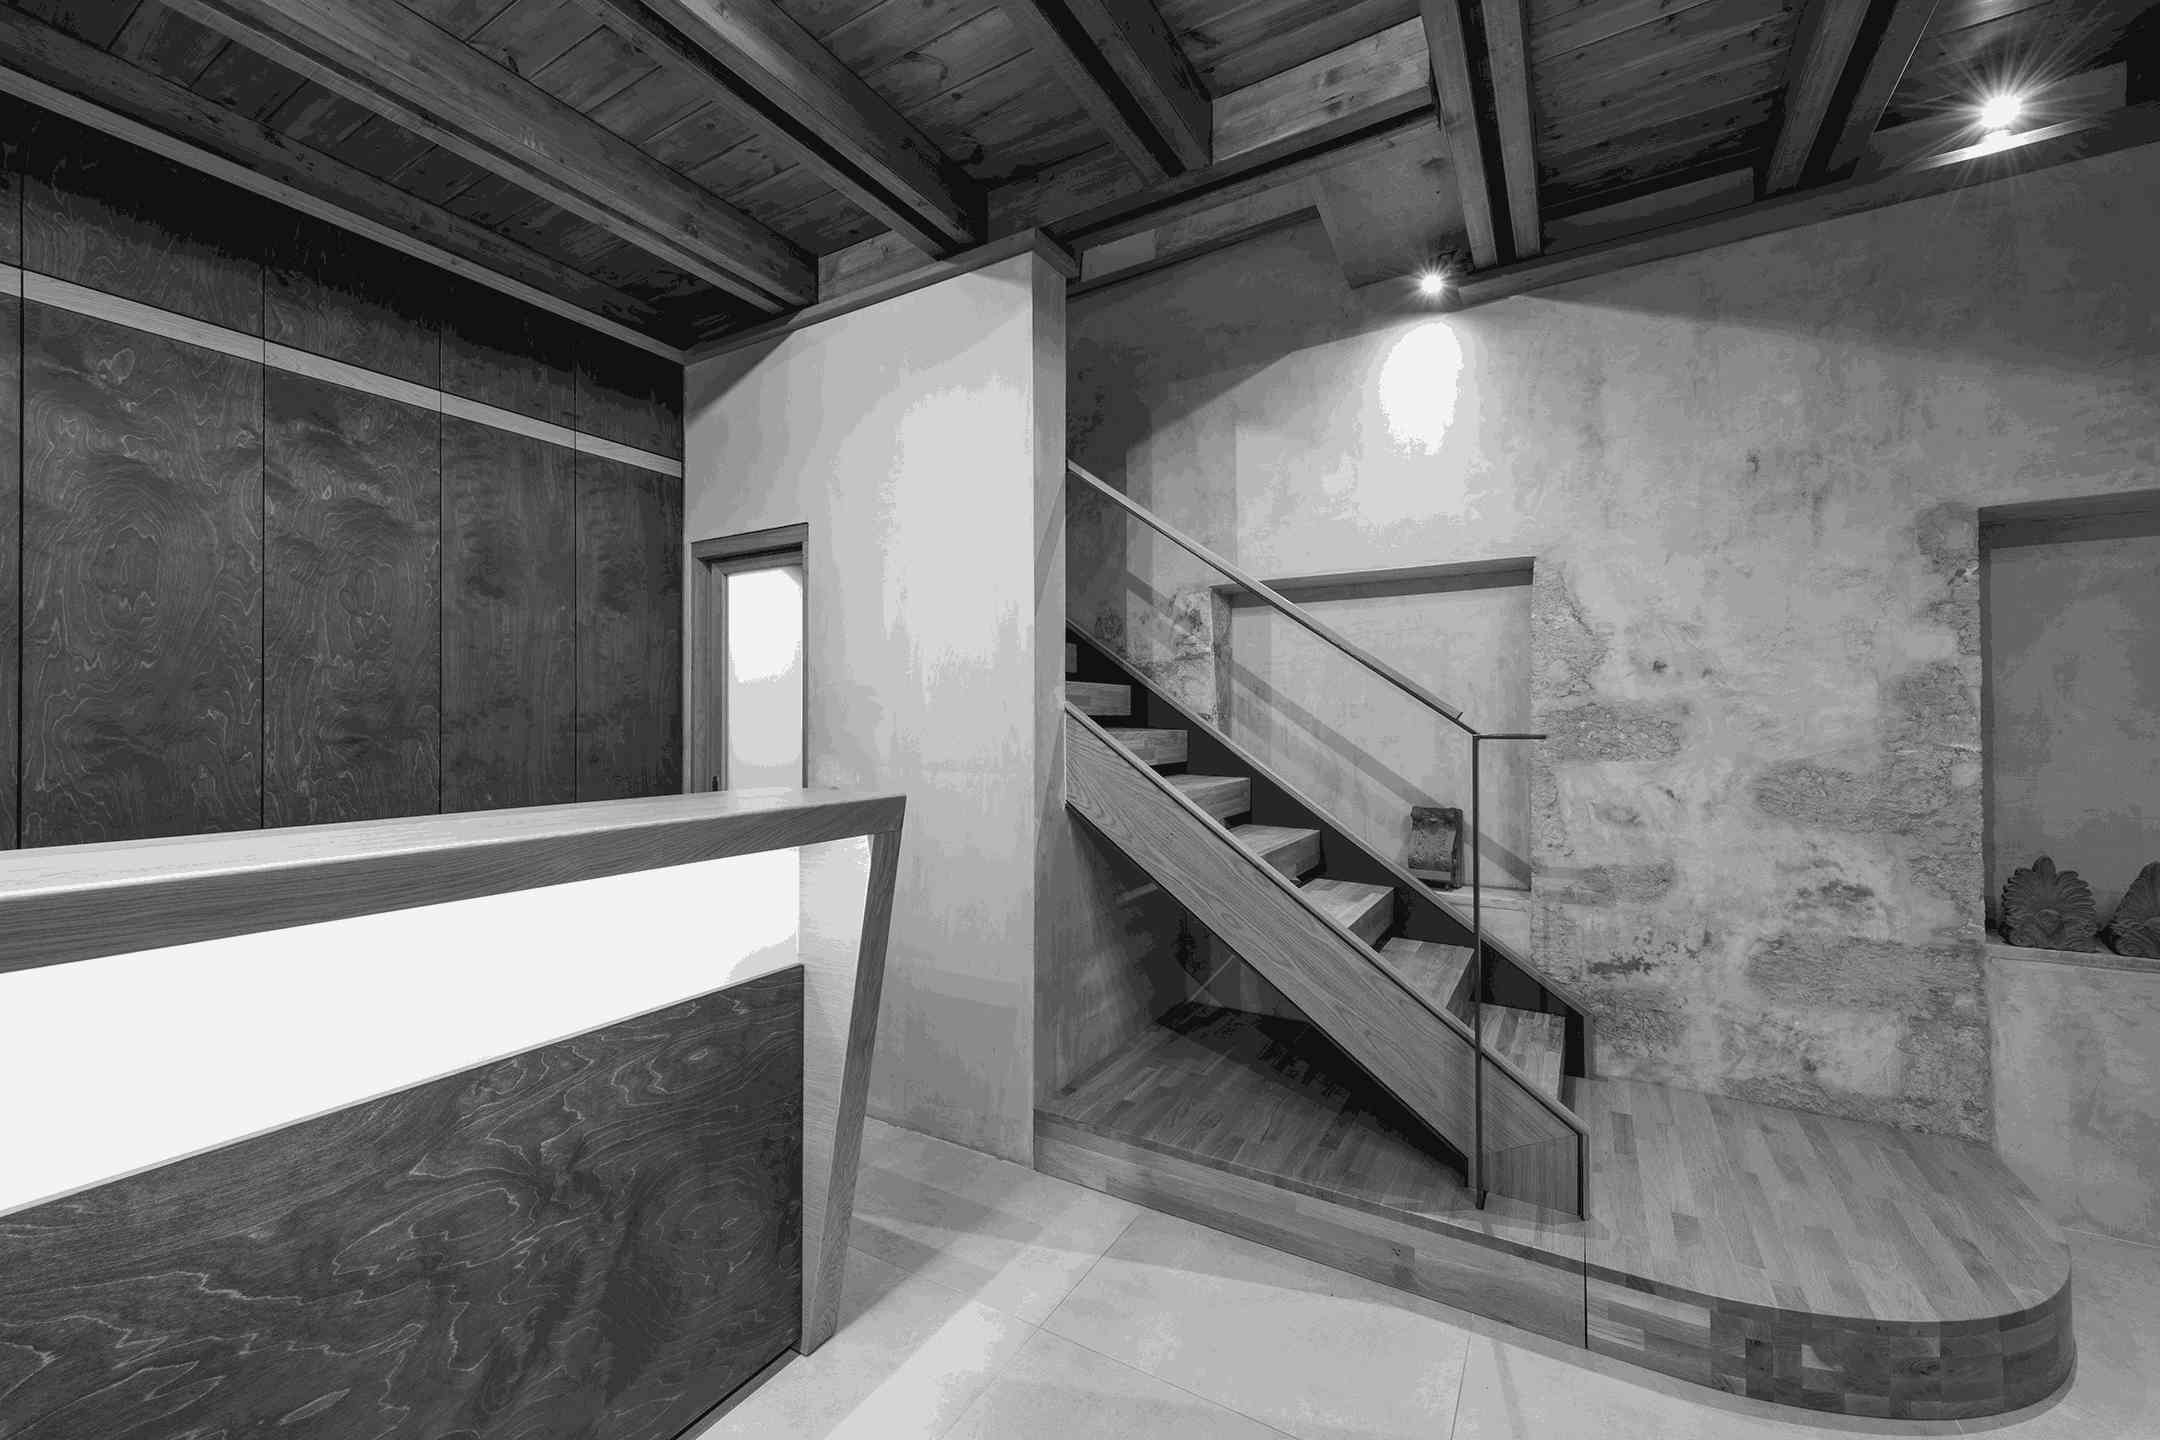 Rehabilitation of Two Buildings and Reuse as a Small Hotel in Chania, Crete by I.K. Verikakis Architectural Office No3